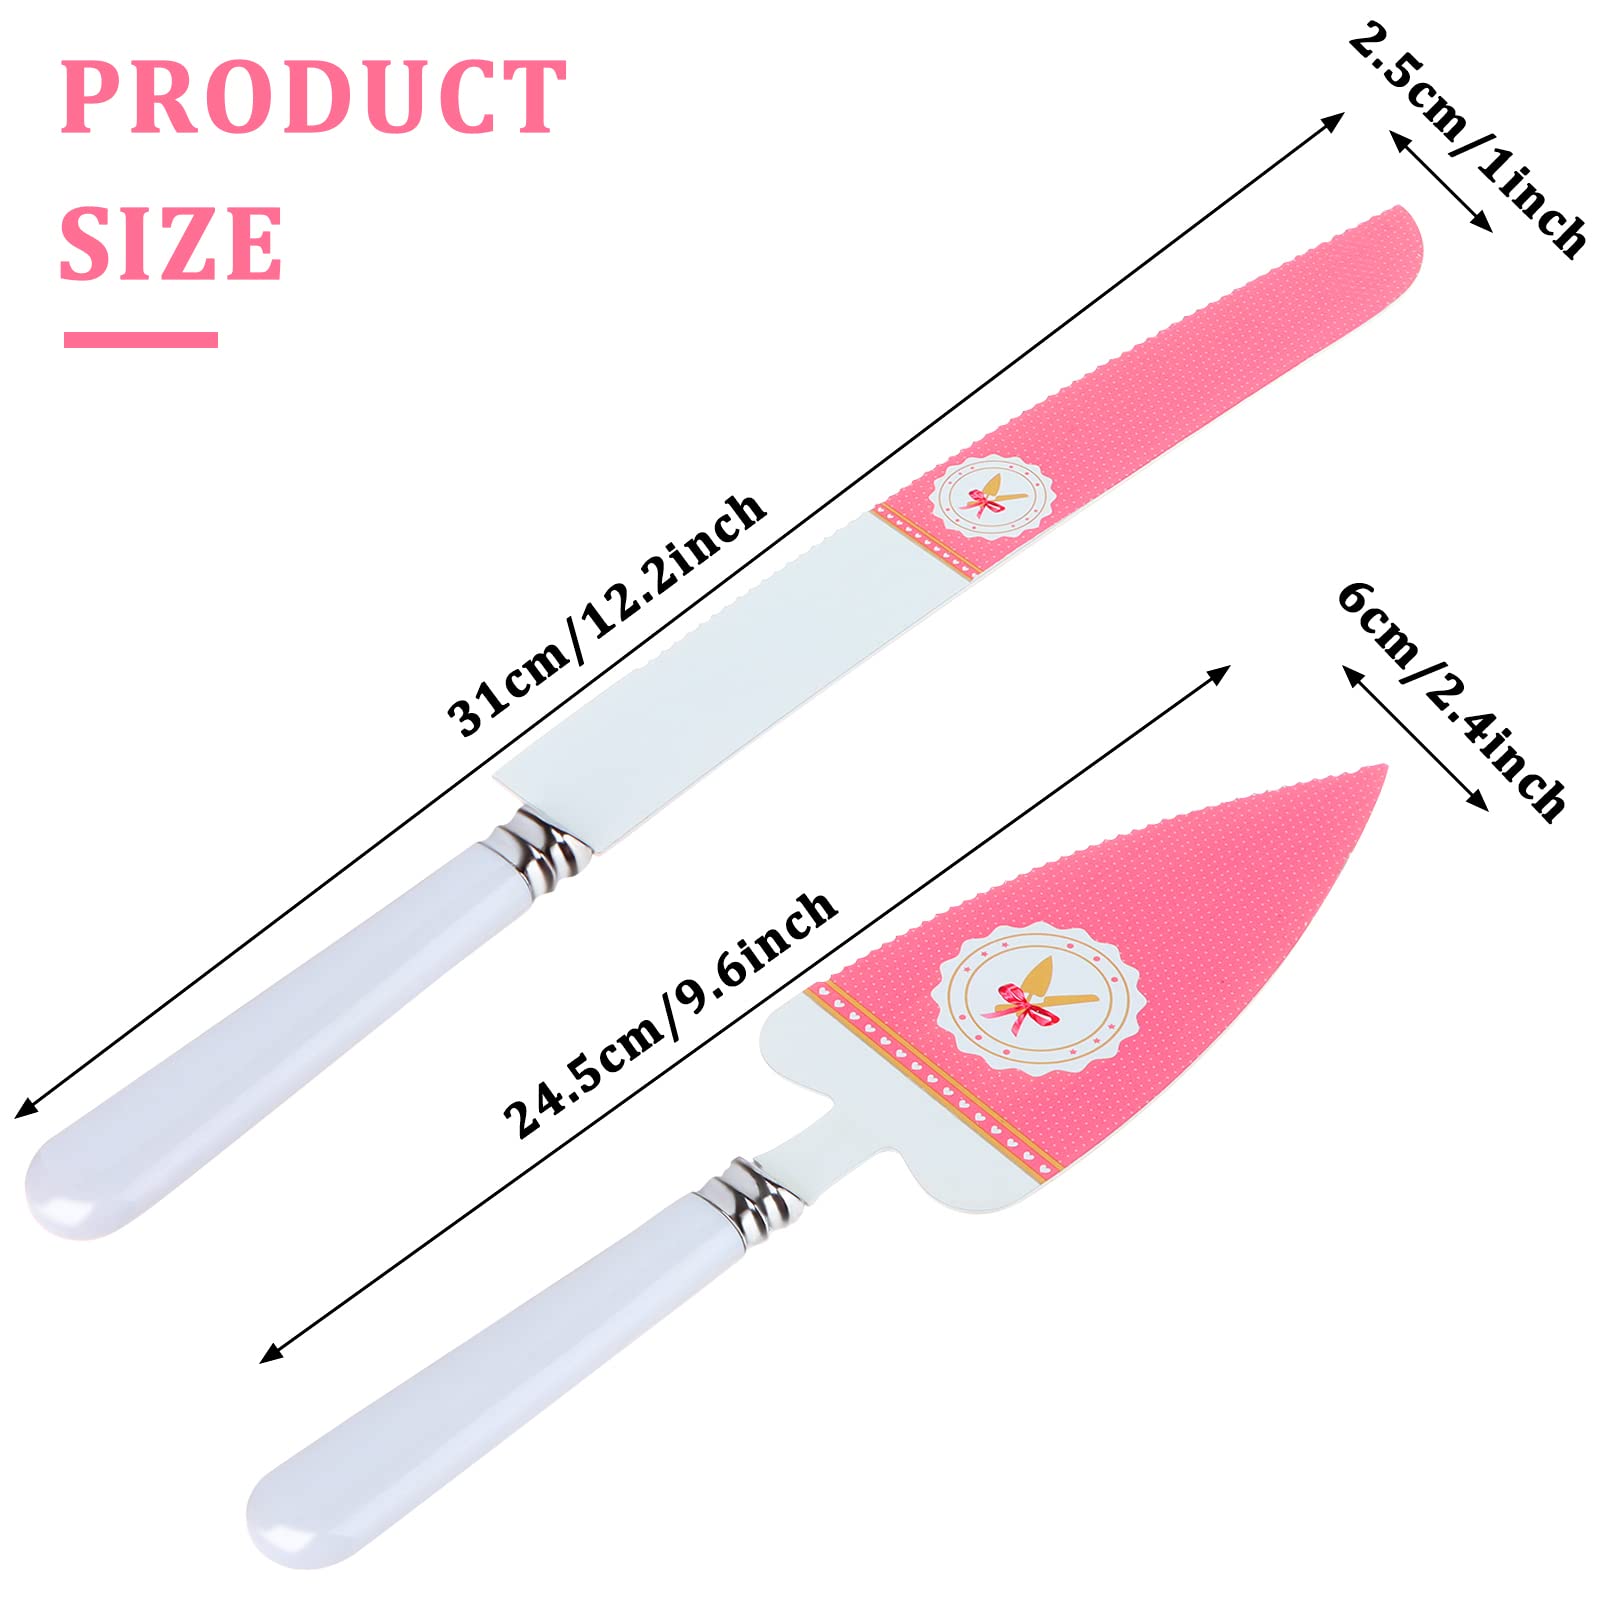 Oppaxf Cake Knife and Server Set, Pink Birthday Cake Knife and Cake Server, Stainless Steel Serrated Blade Cake Cutter, Novel Cake Cutting Set for Birthday Parties, Daily Meals, Wedding, Set of 2